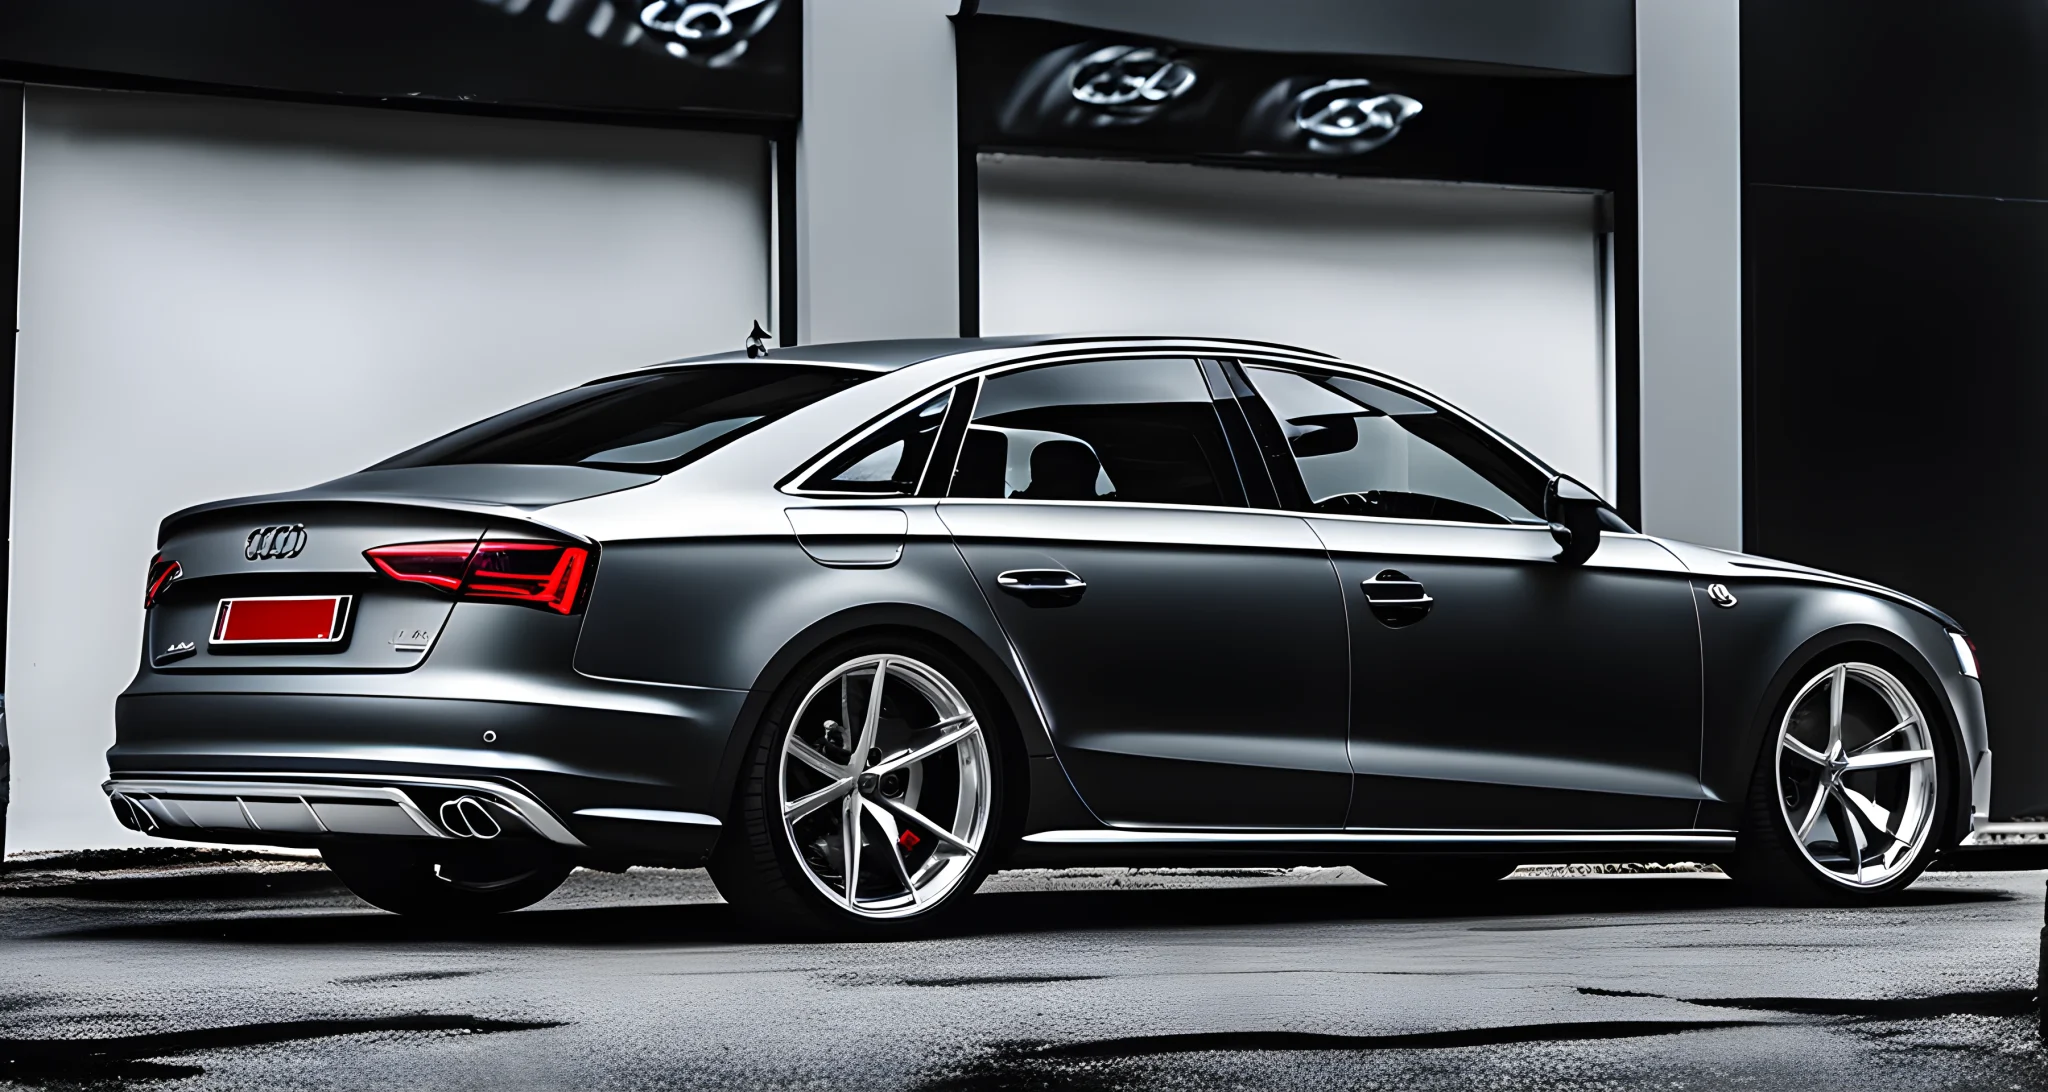 The image shows a custom aftermarket exhaust system installed on an Audi car.